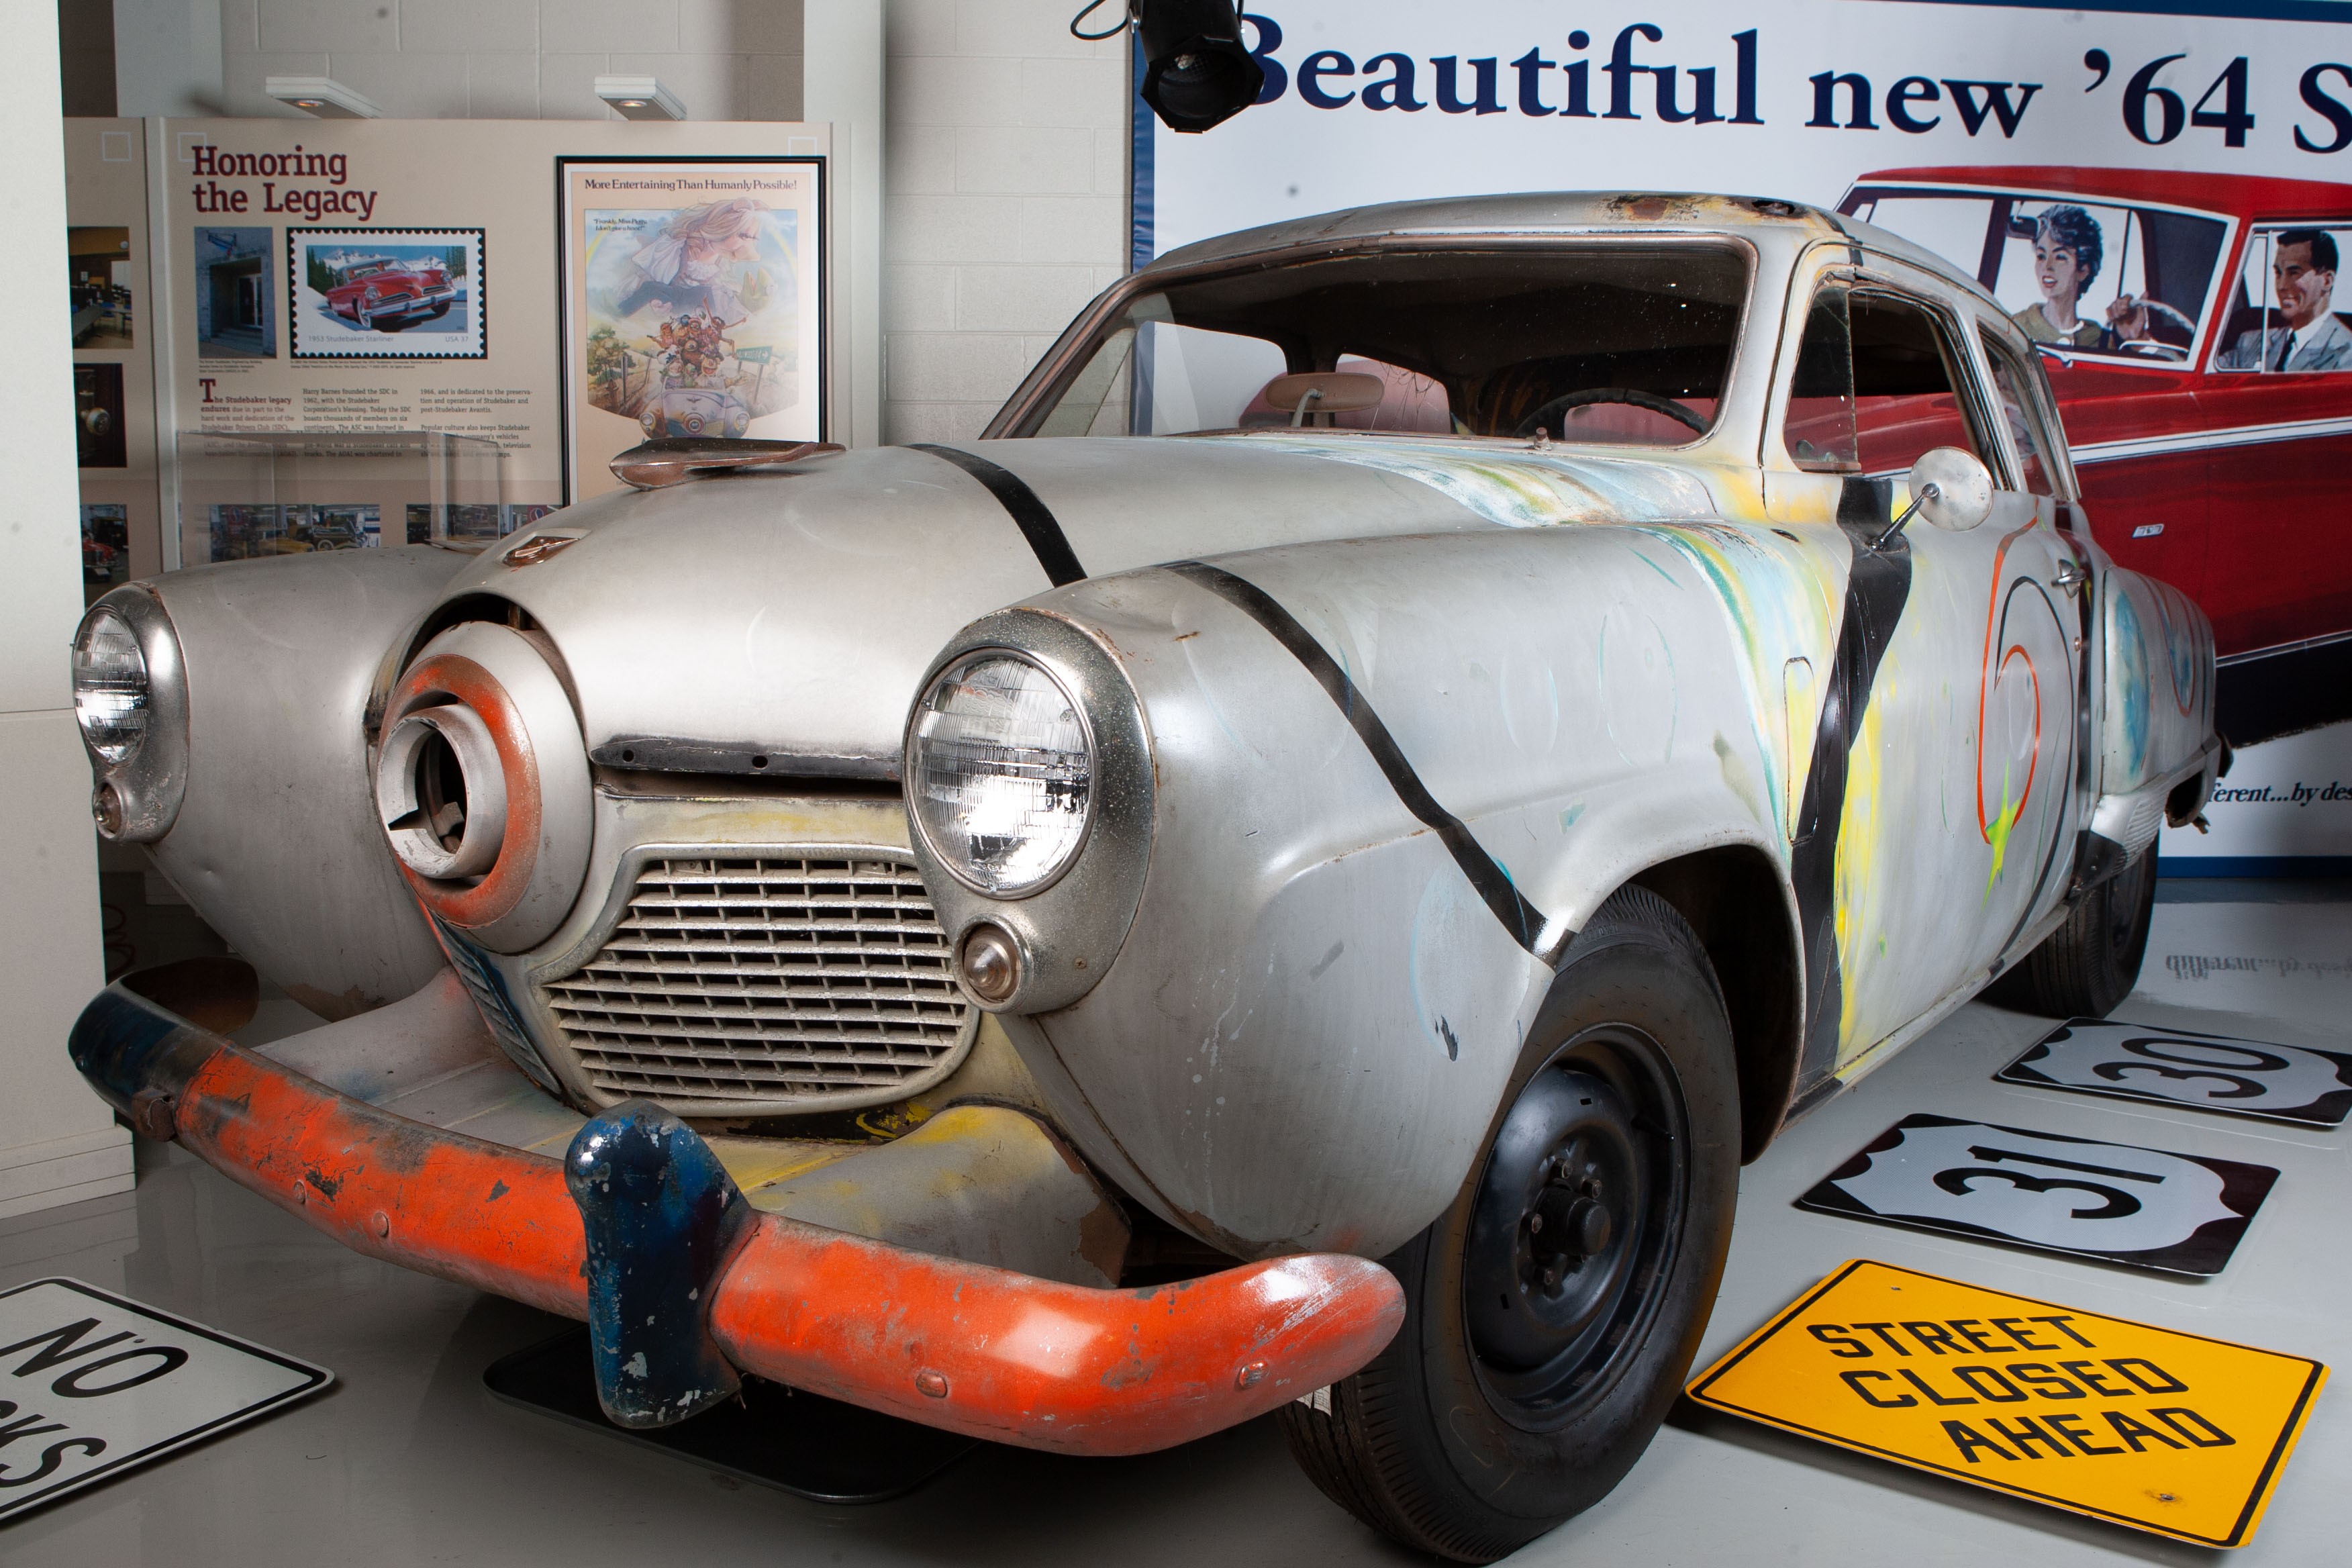 Studebaker Commander Muppet Movie Car to be Restored by The Studebaker National Museum